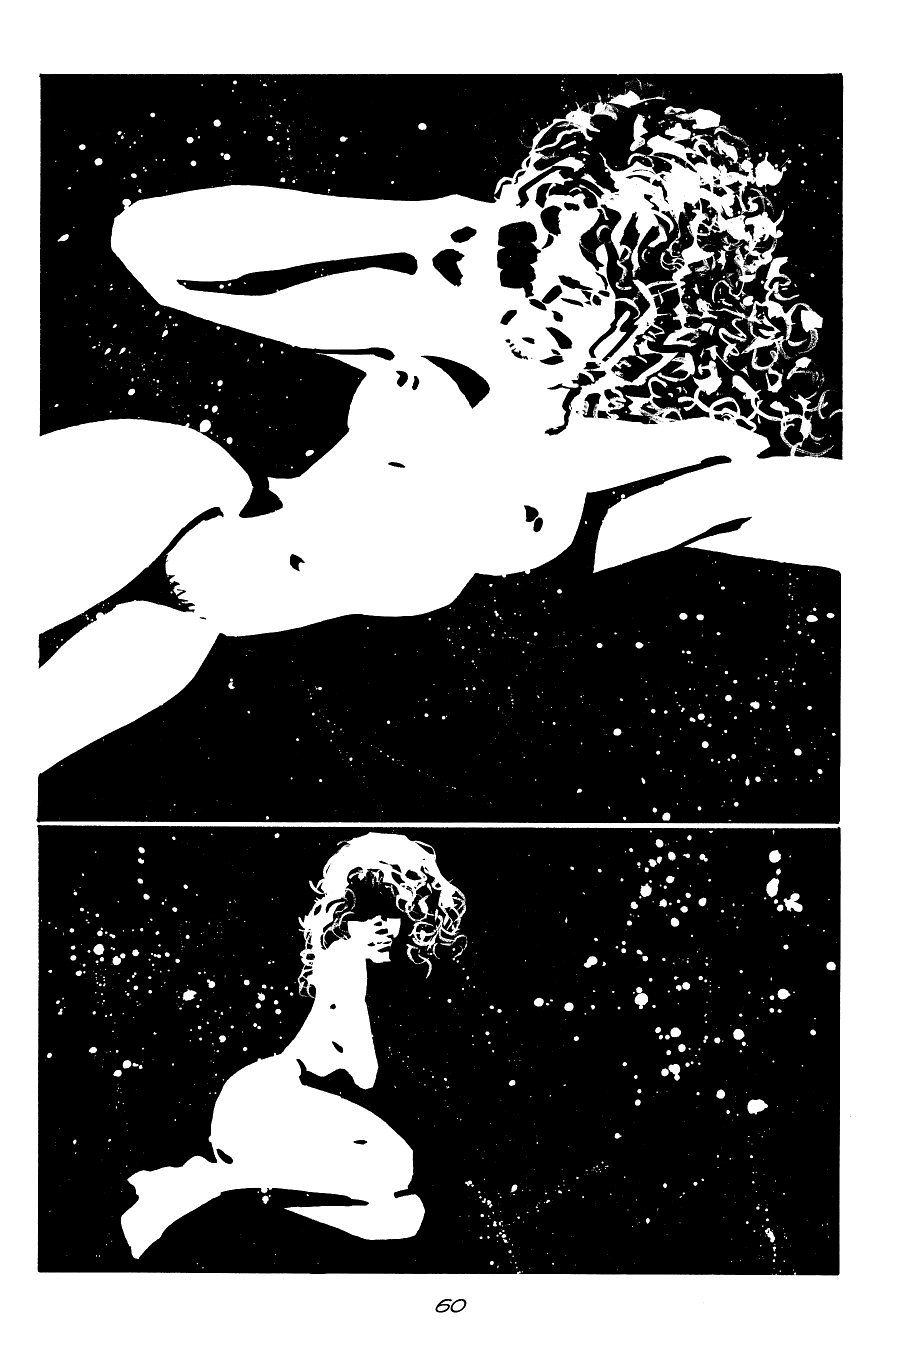 page 60 of sin city 7 hell and back